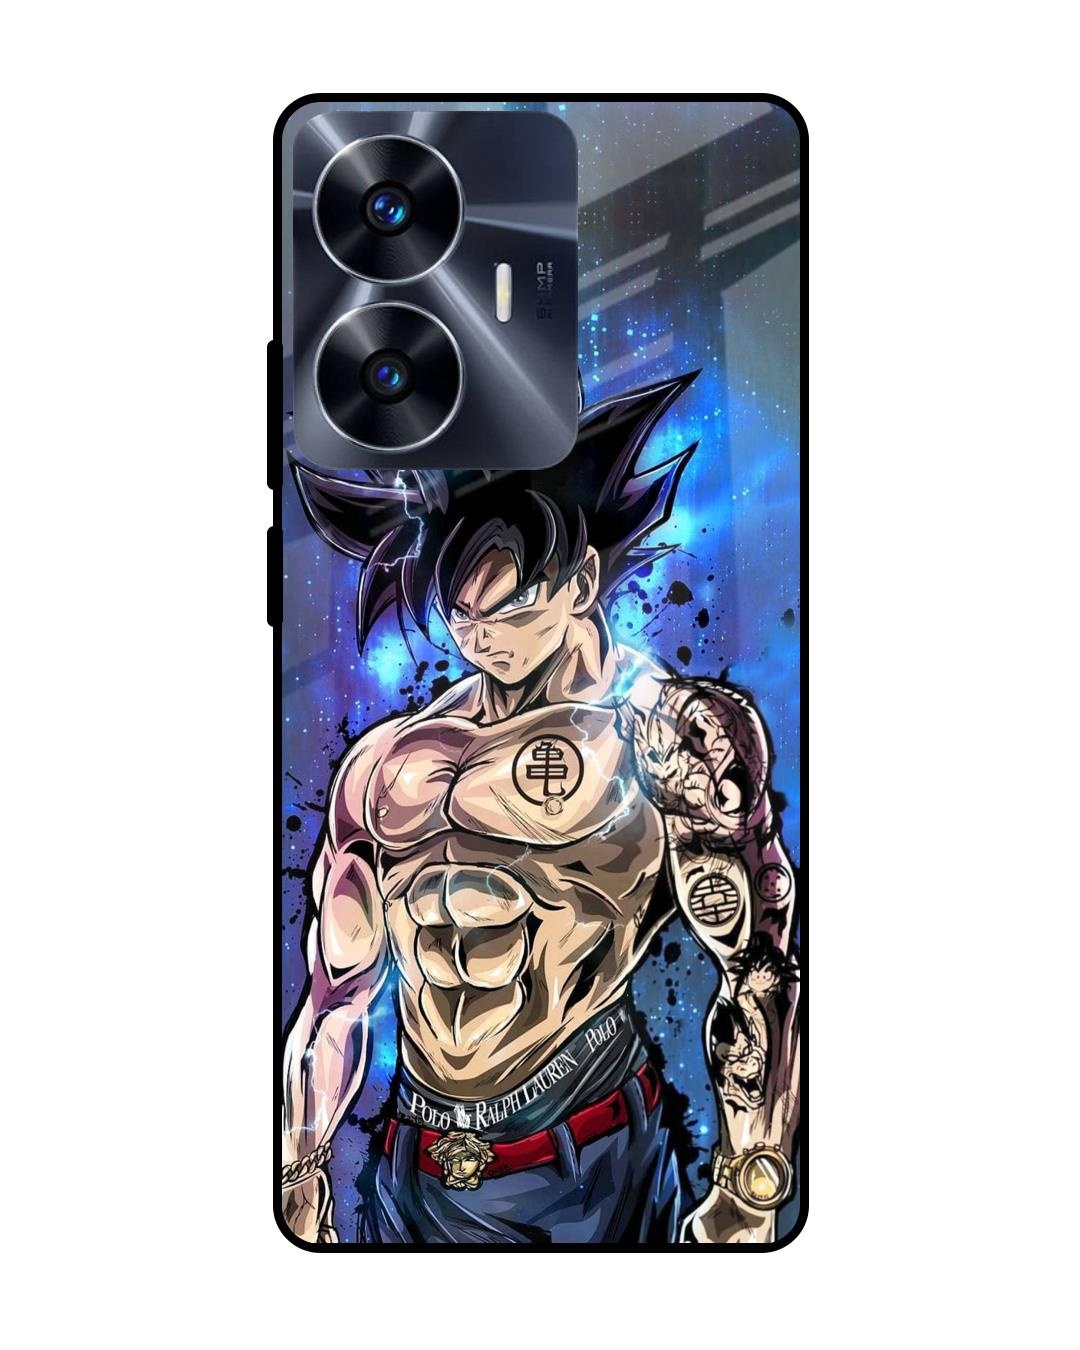 realme GT NEO 3T - Dragon Ball Z Edition is coming to Europe in July!